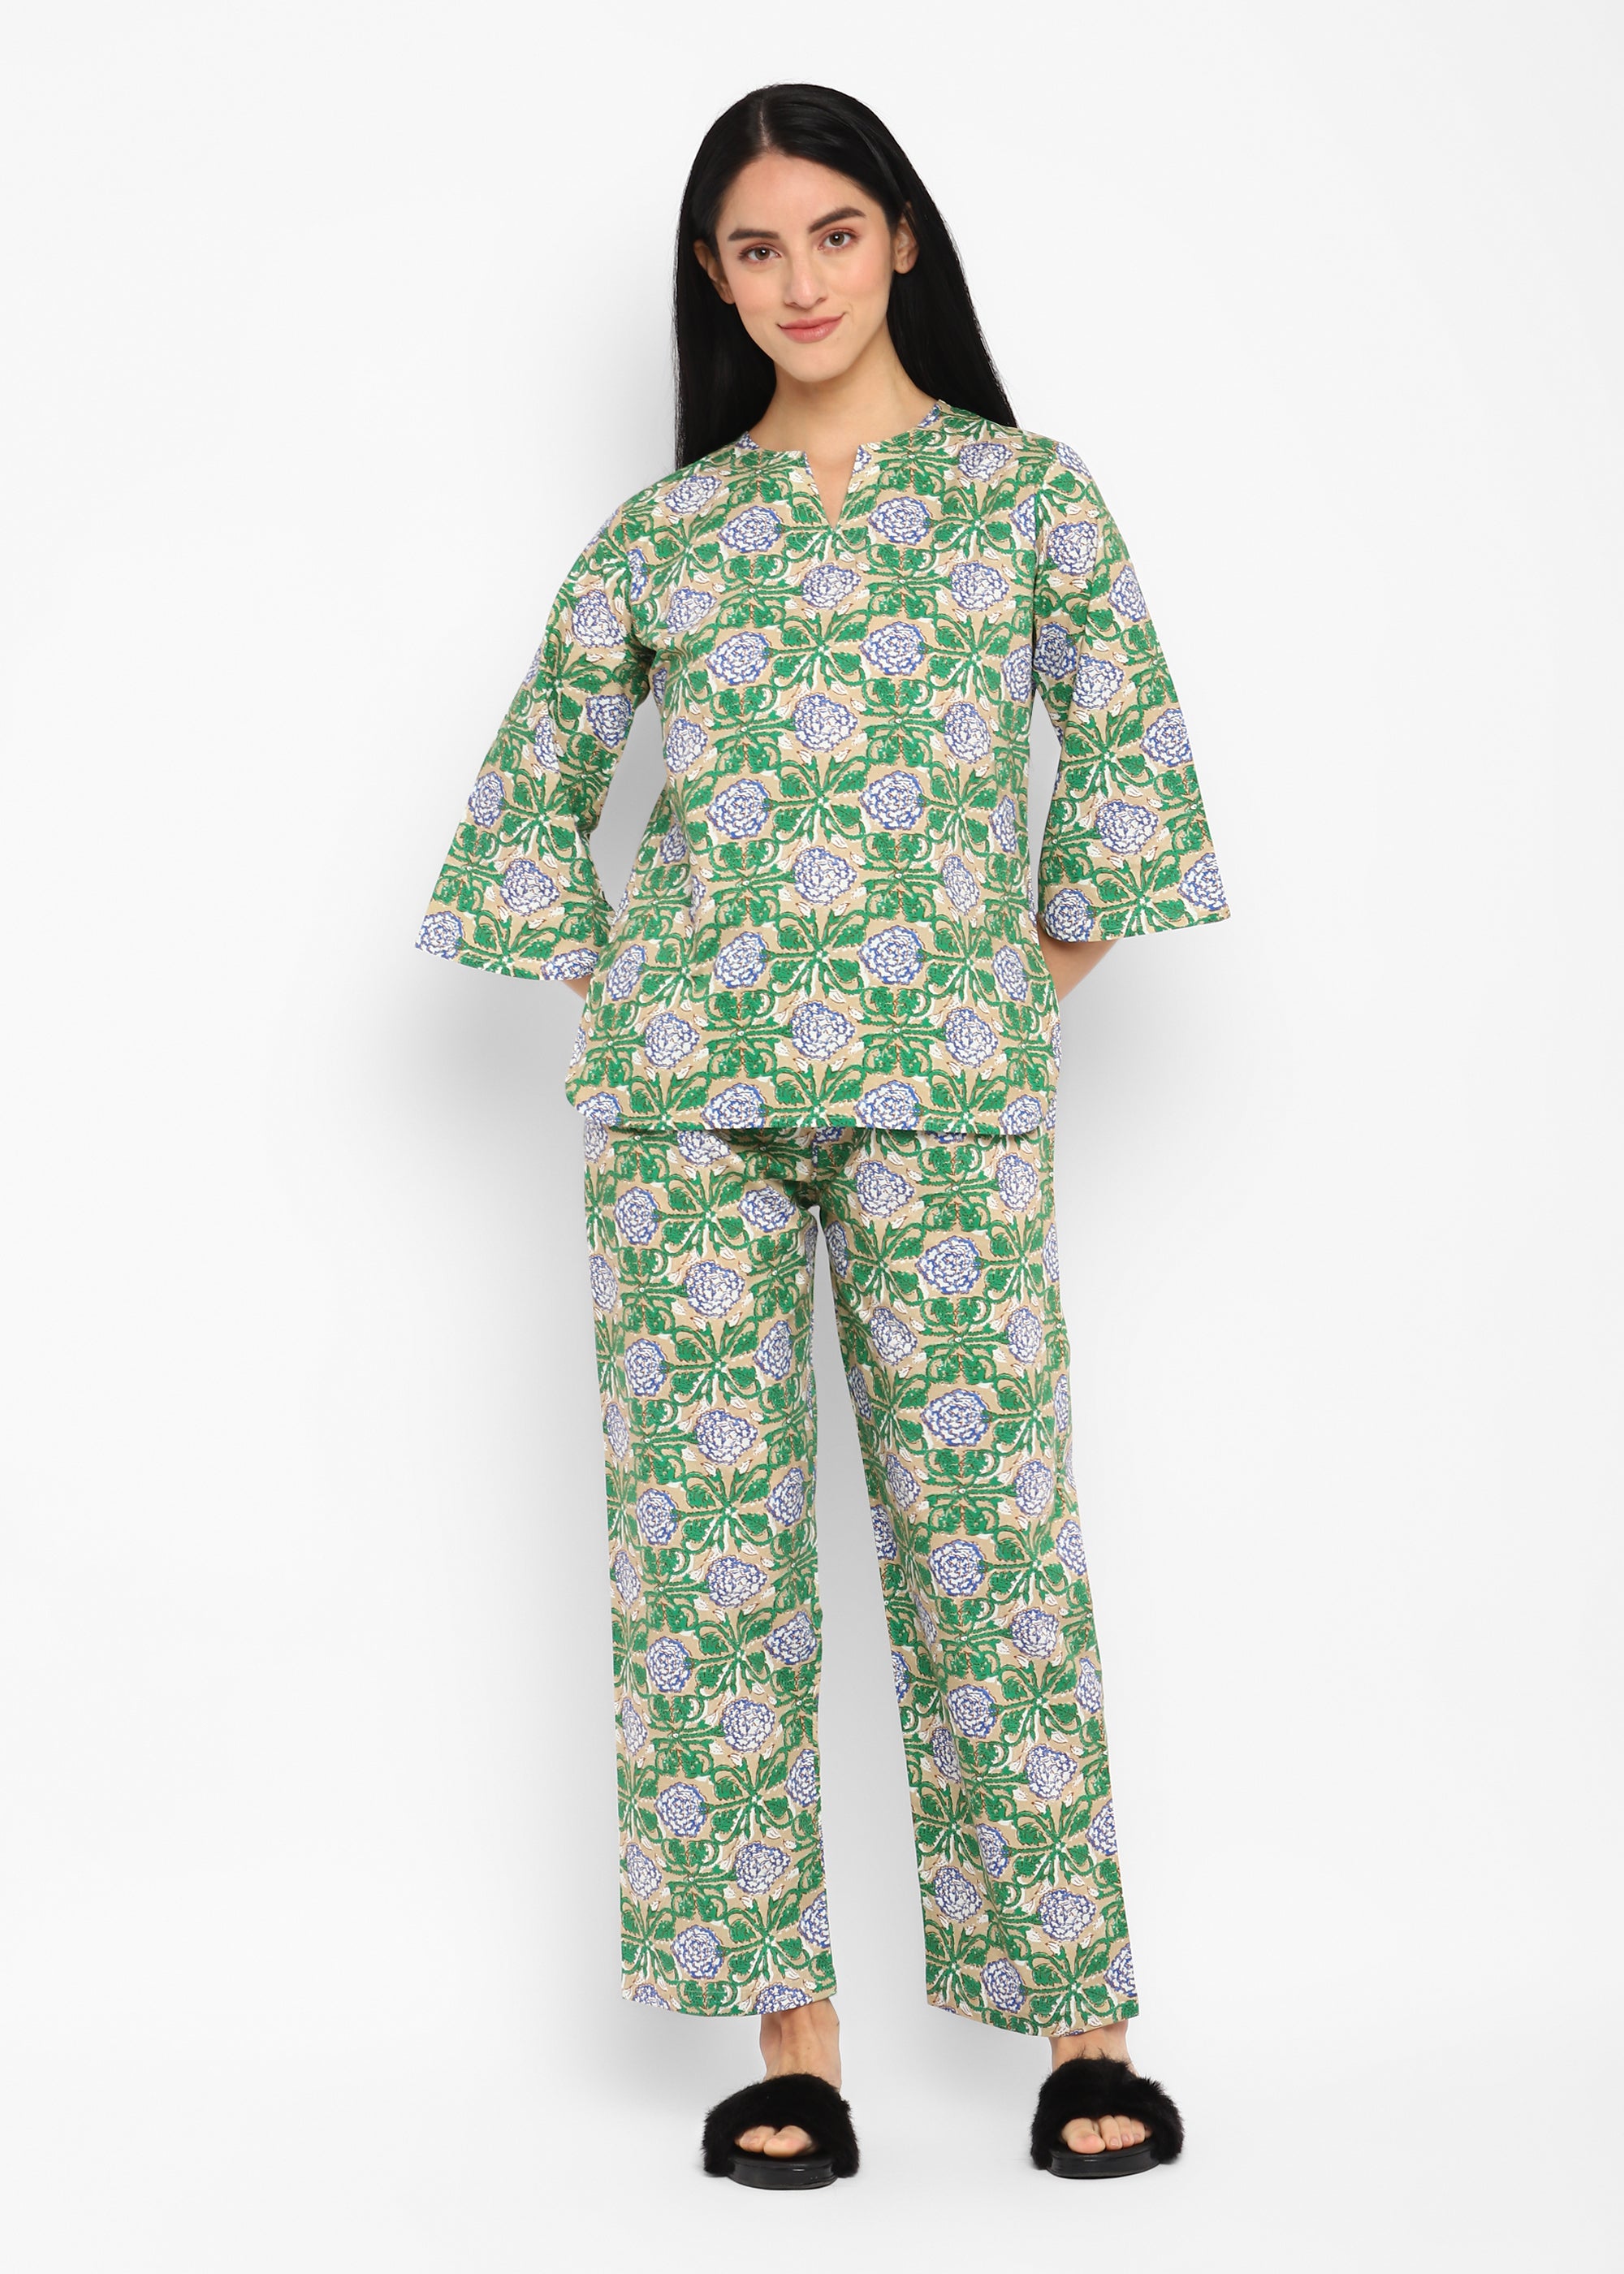 Blue Flower and Green Leaf Print V Neck 3/4th Sleeve Women's Night suit - Shopbloom